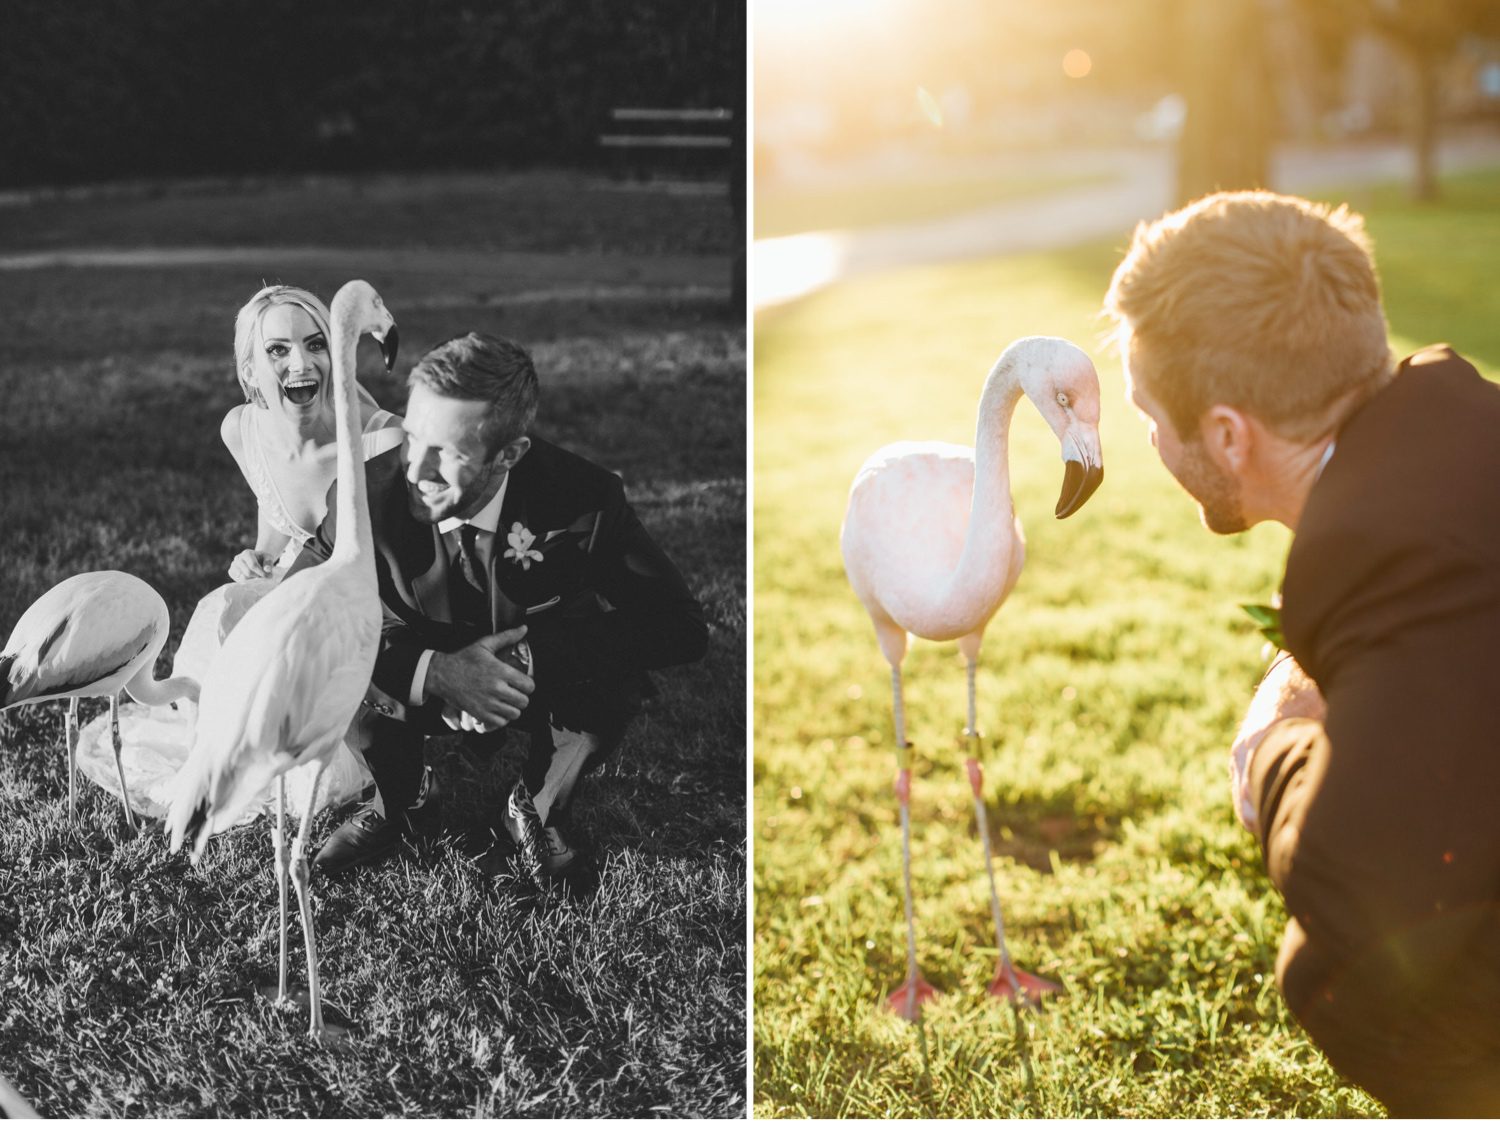 Bride and Groom with live flamingo